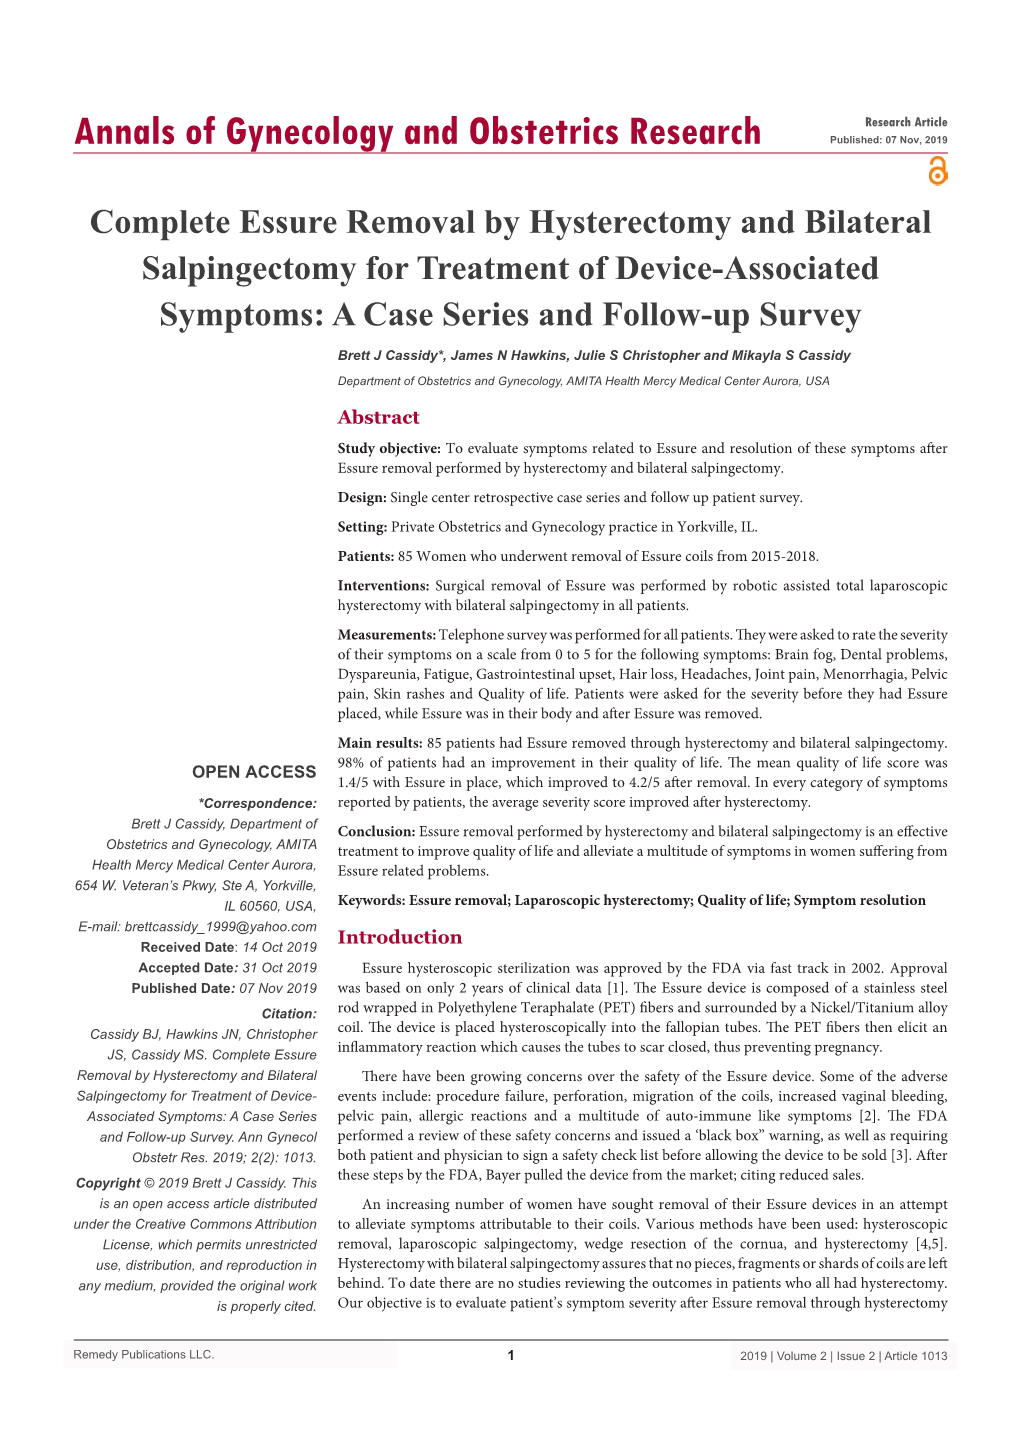 Complete Essure Removal by Hysterectomy and Bilateral Salpingectomy for Treatment of Device-Associated Symptoms: a Case Series and Follow-Up Survey